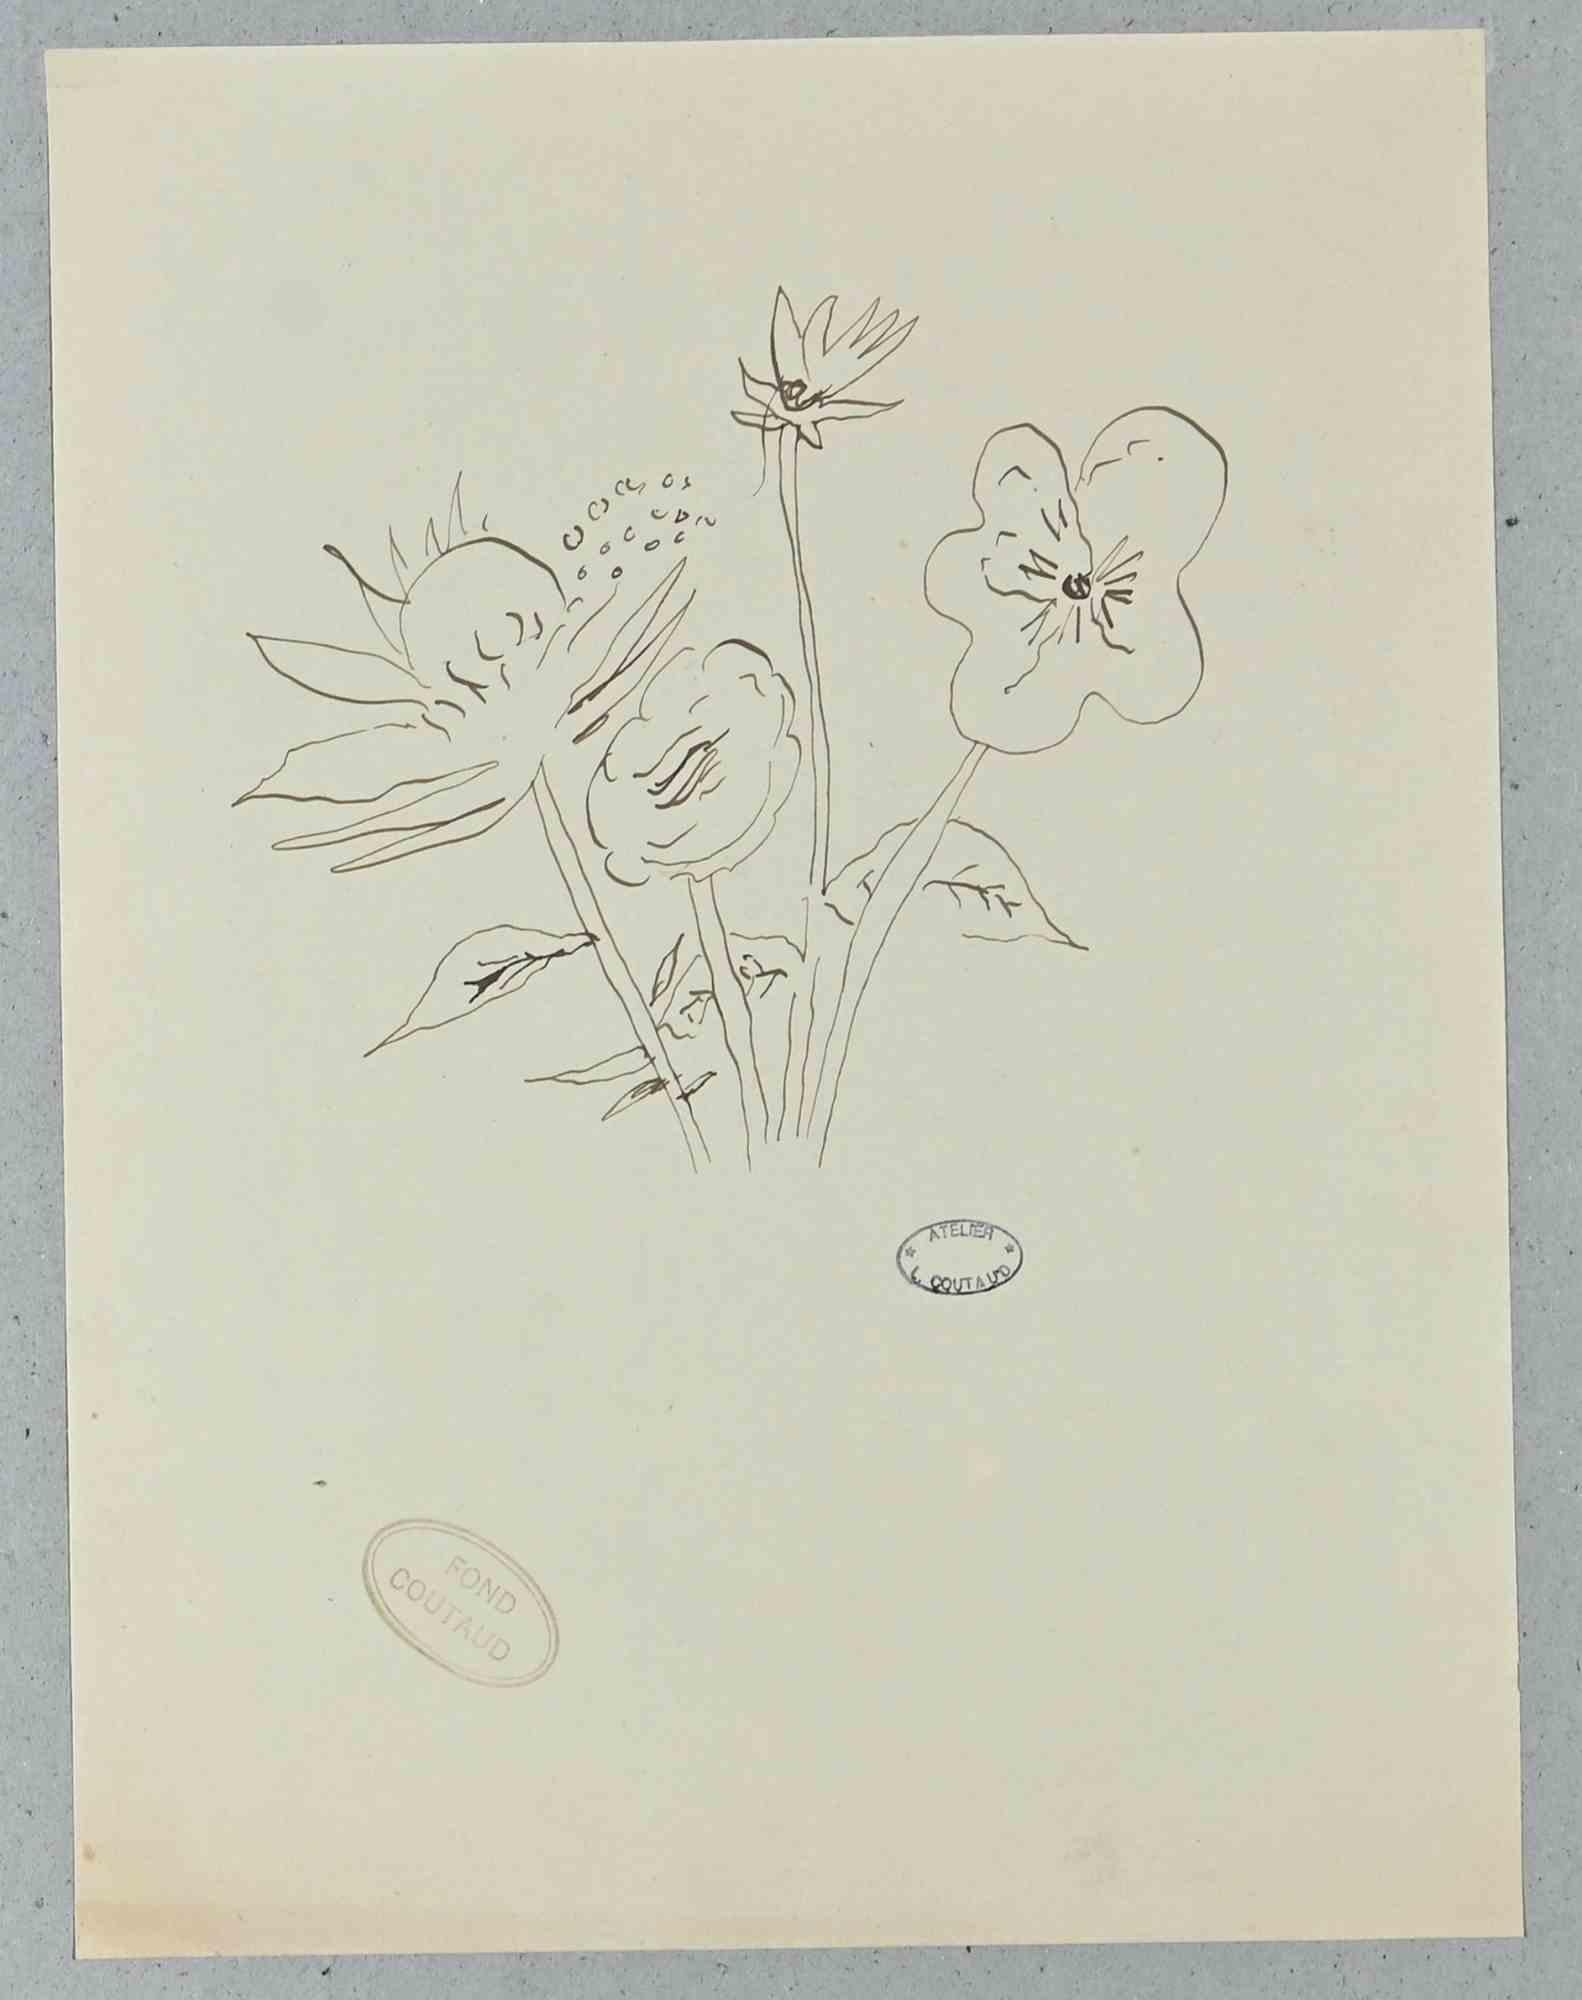 Flowers - Original Drawing by Lucien Coutaud - Mid 20th century